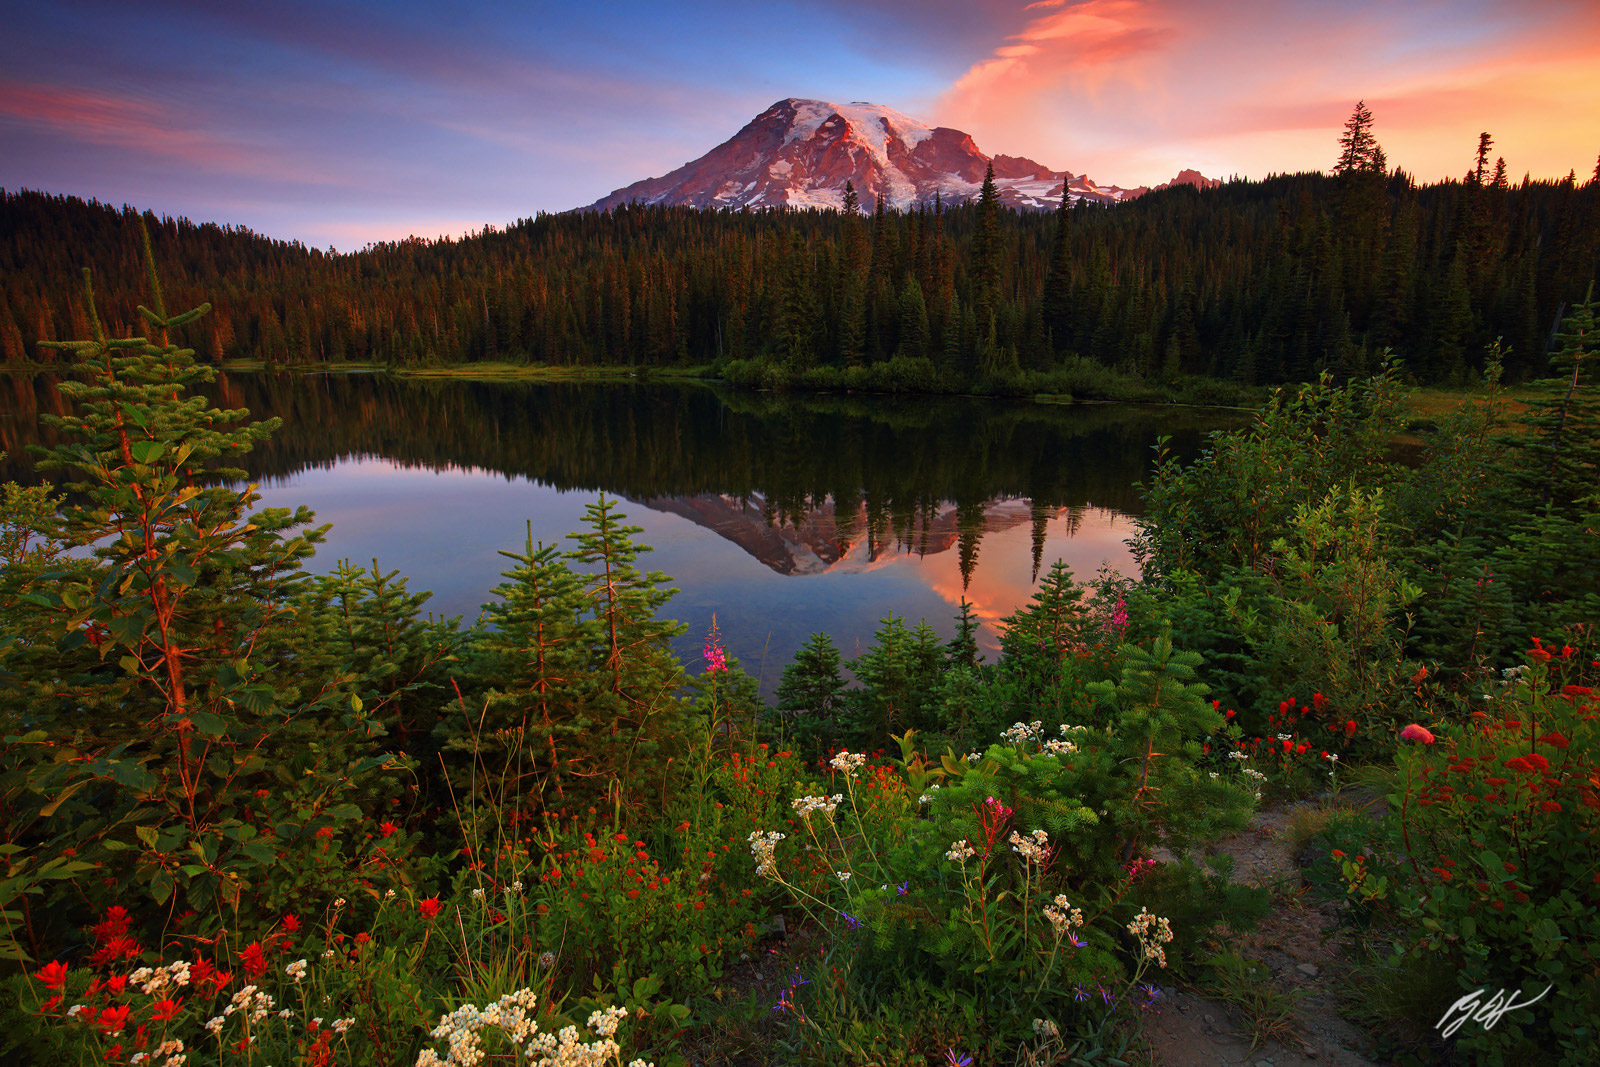 Sunrise Wildflowers and Mt. Rainier Reflected in Reflection lakes in Mt. Rainier National Park in Washington